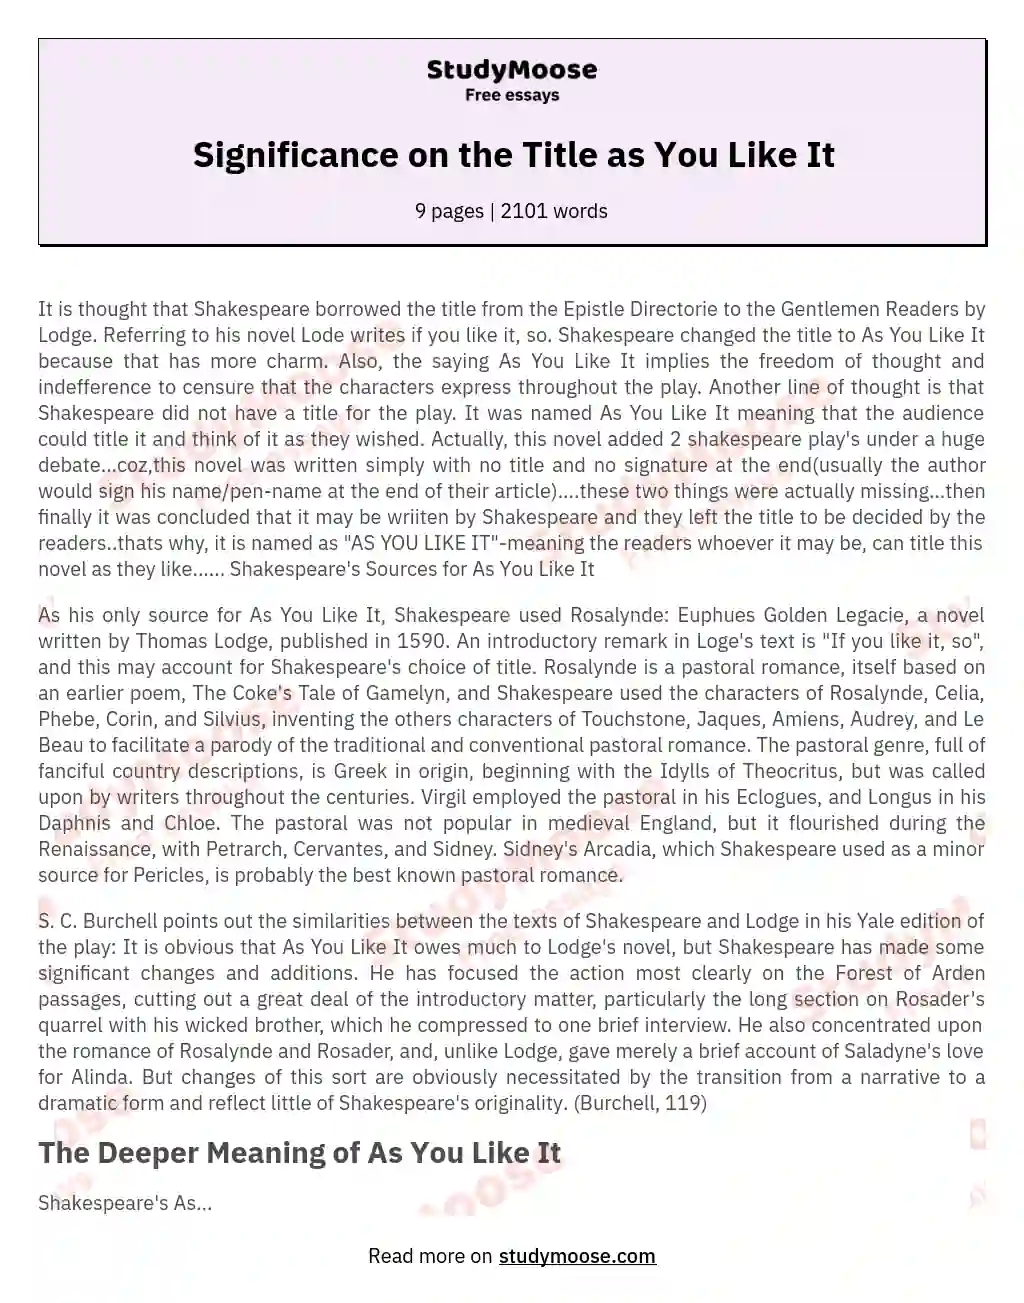 Significance on the Title as You Like It essay